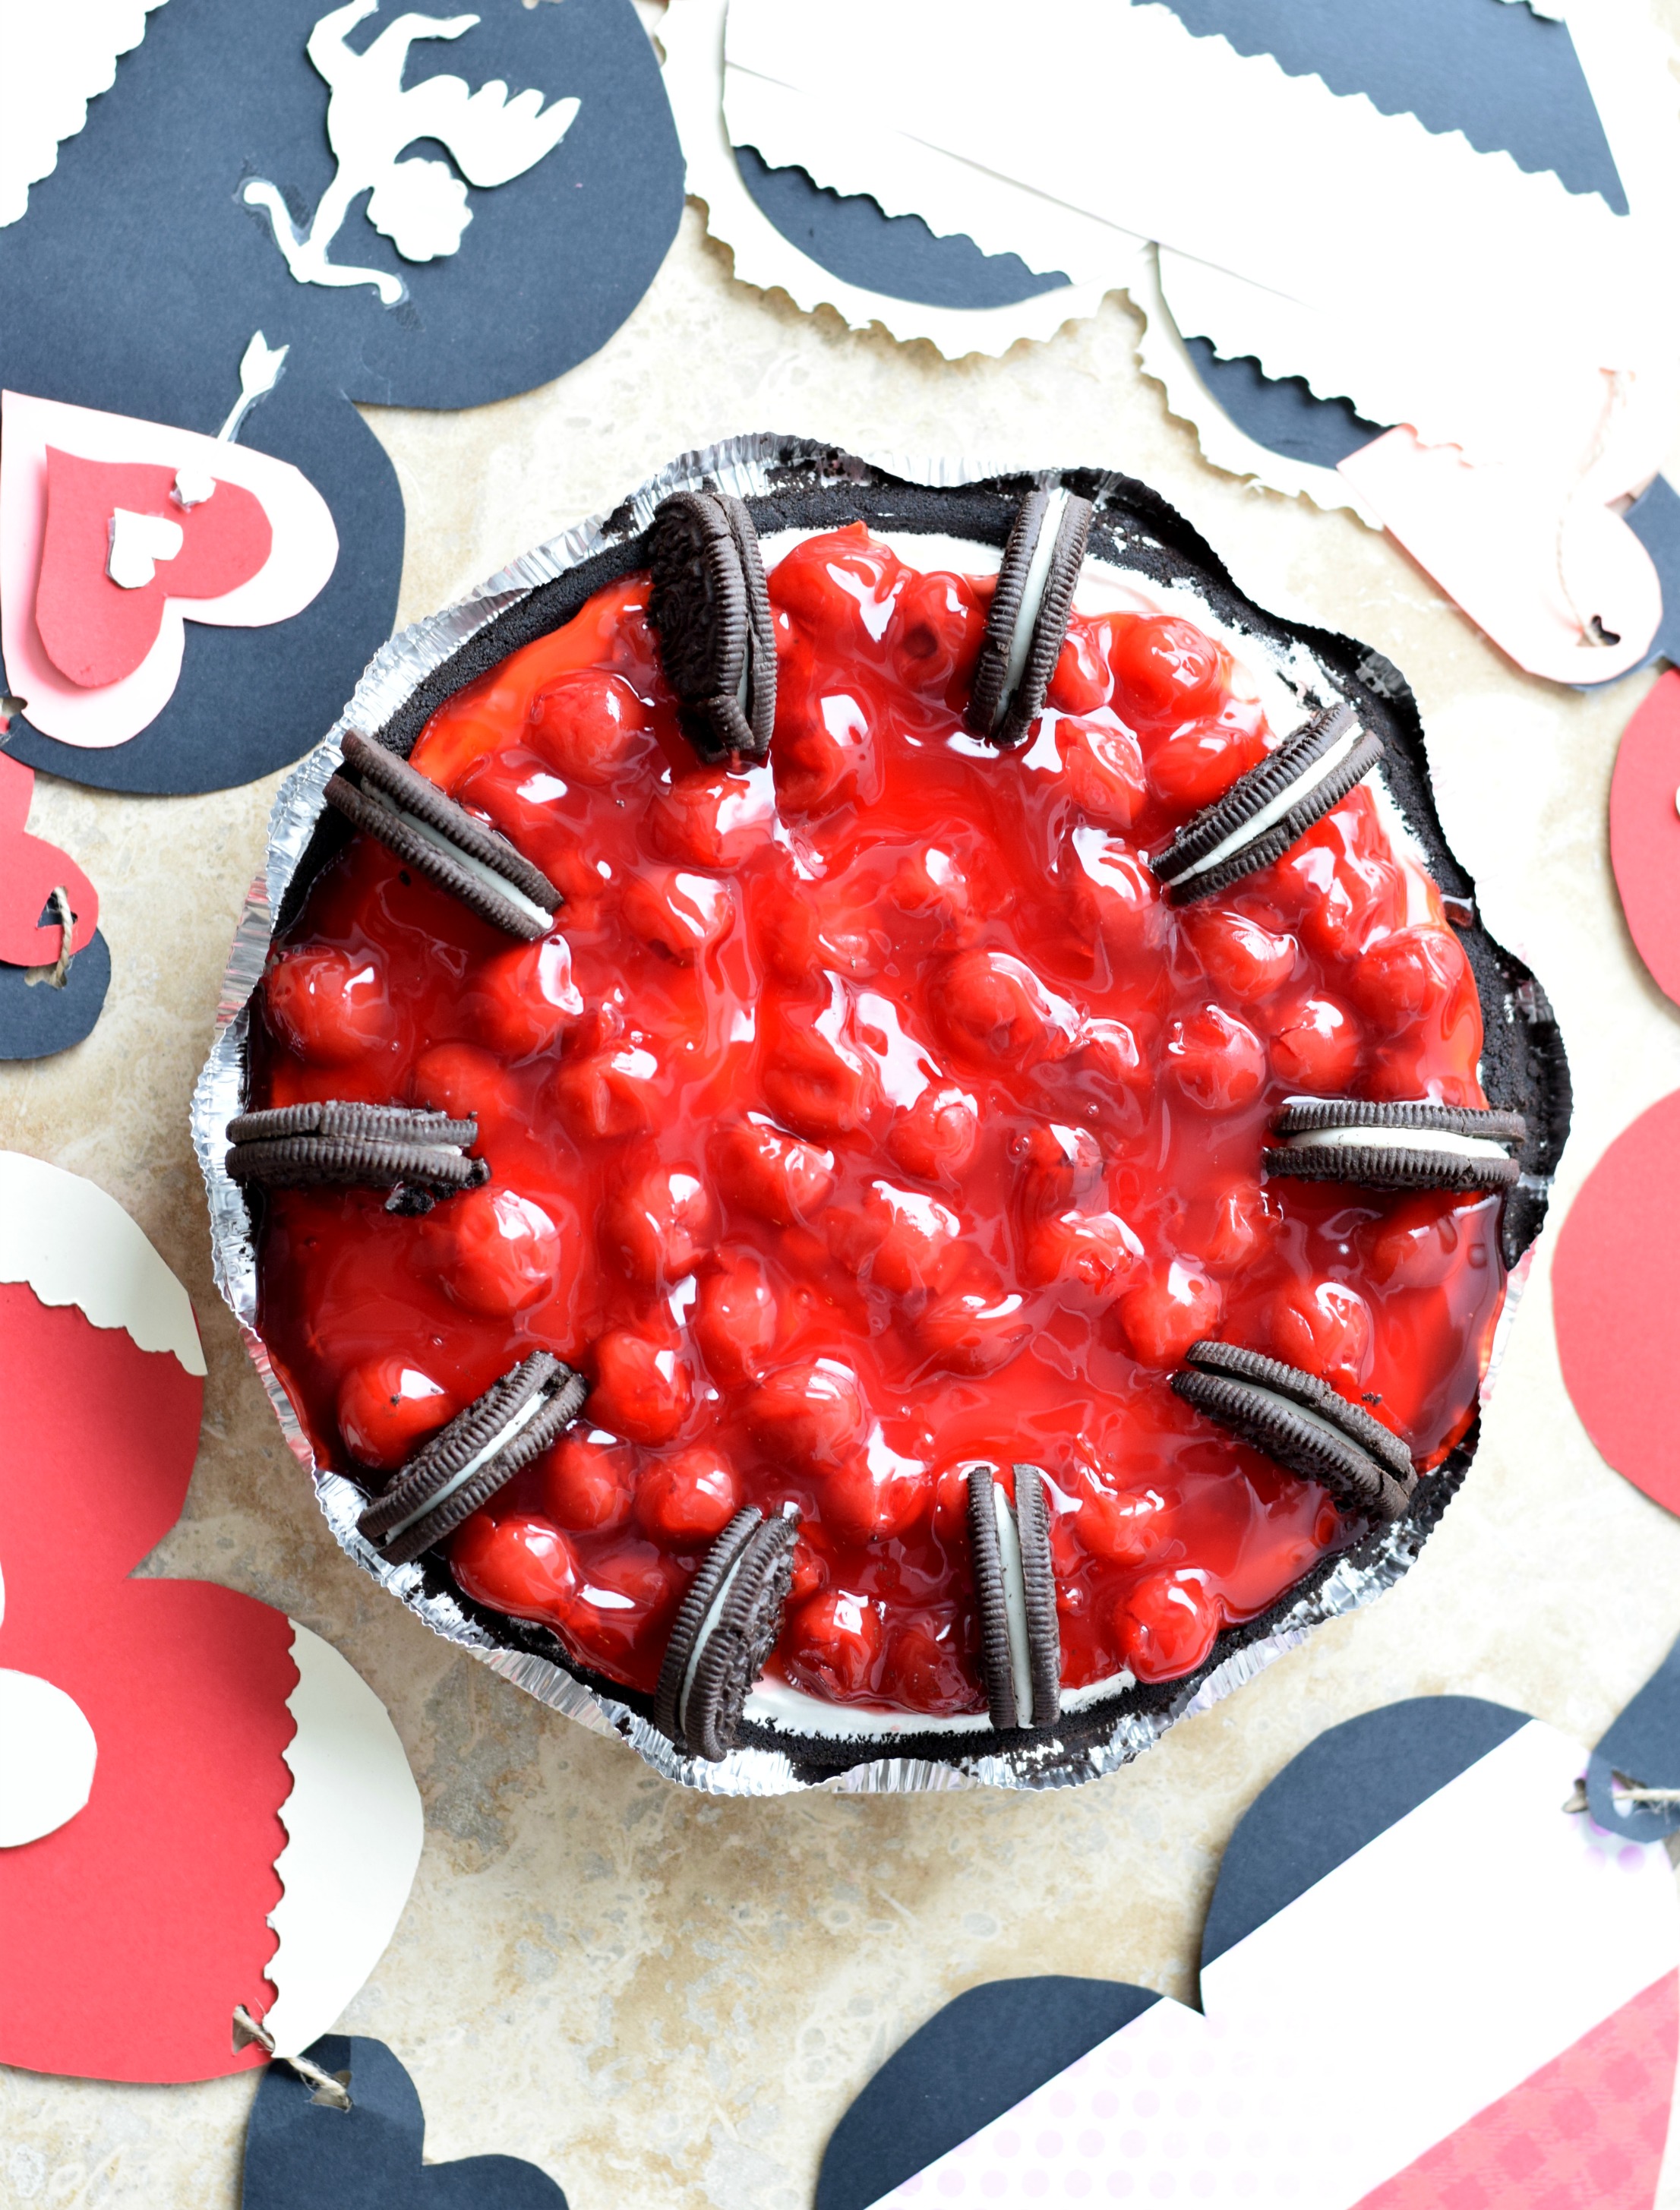 Oreo Cherry Cheesecake! Can't go wrong with oreos and it's a perfect dessert for Valentines Day.